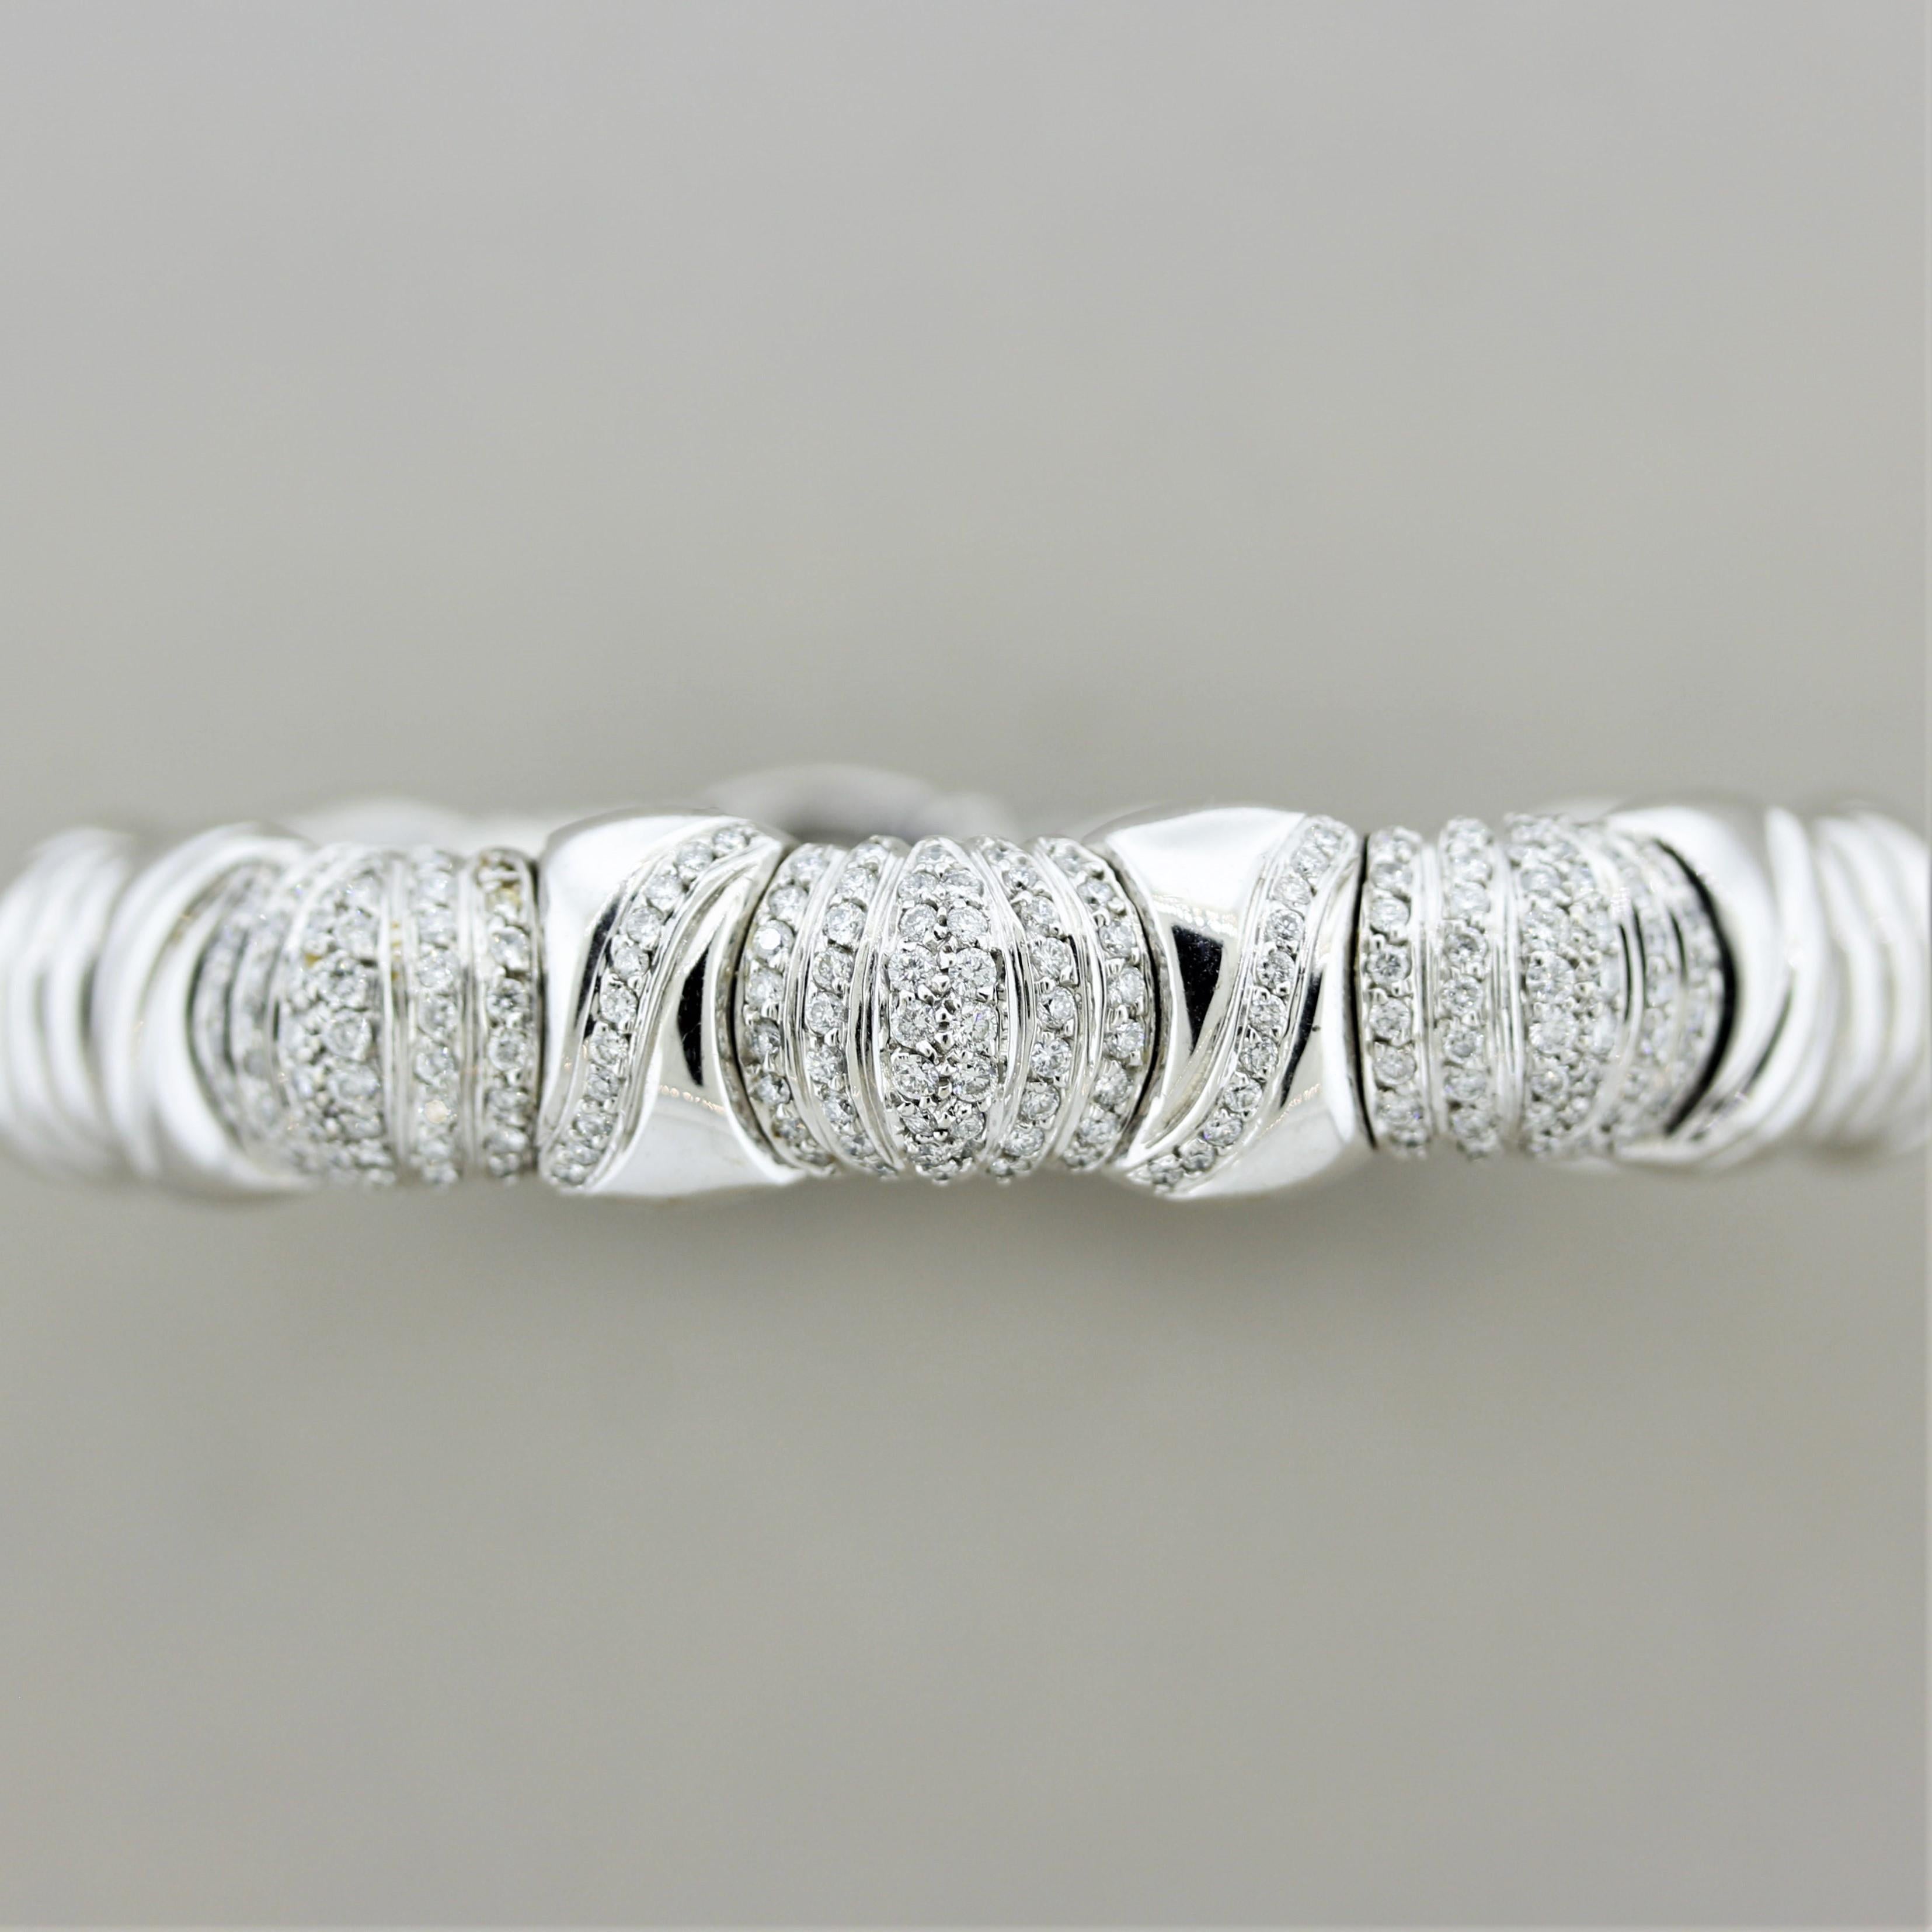 A white gold cuff bracelet with 1.70 carats of round brilliant-cut diamonds. They are set in vertical rows in the center of the bracelet with the same design emulated in gold throughout the piece. Made in 18k white gold with some stretch at its